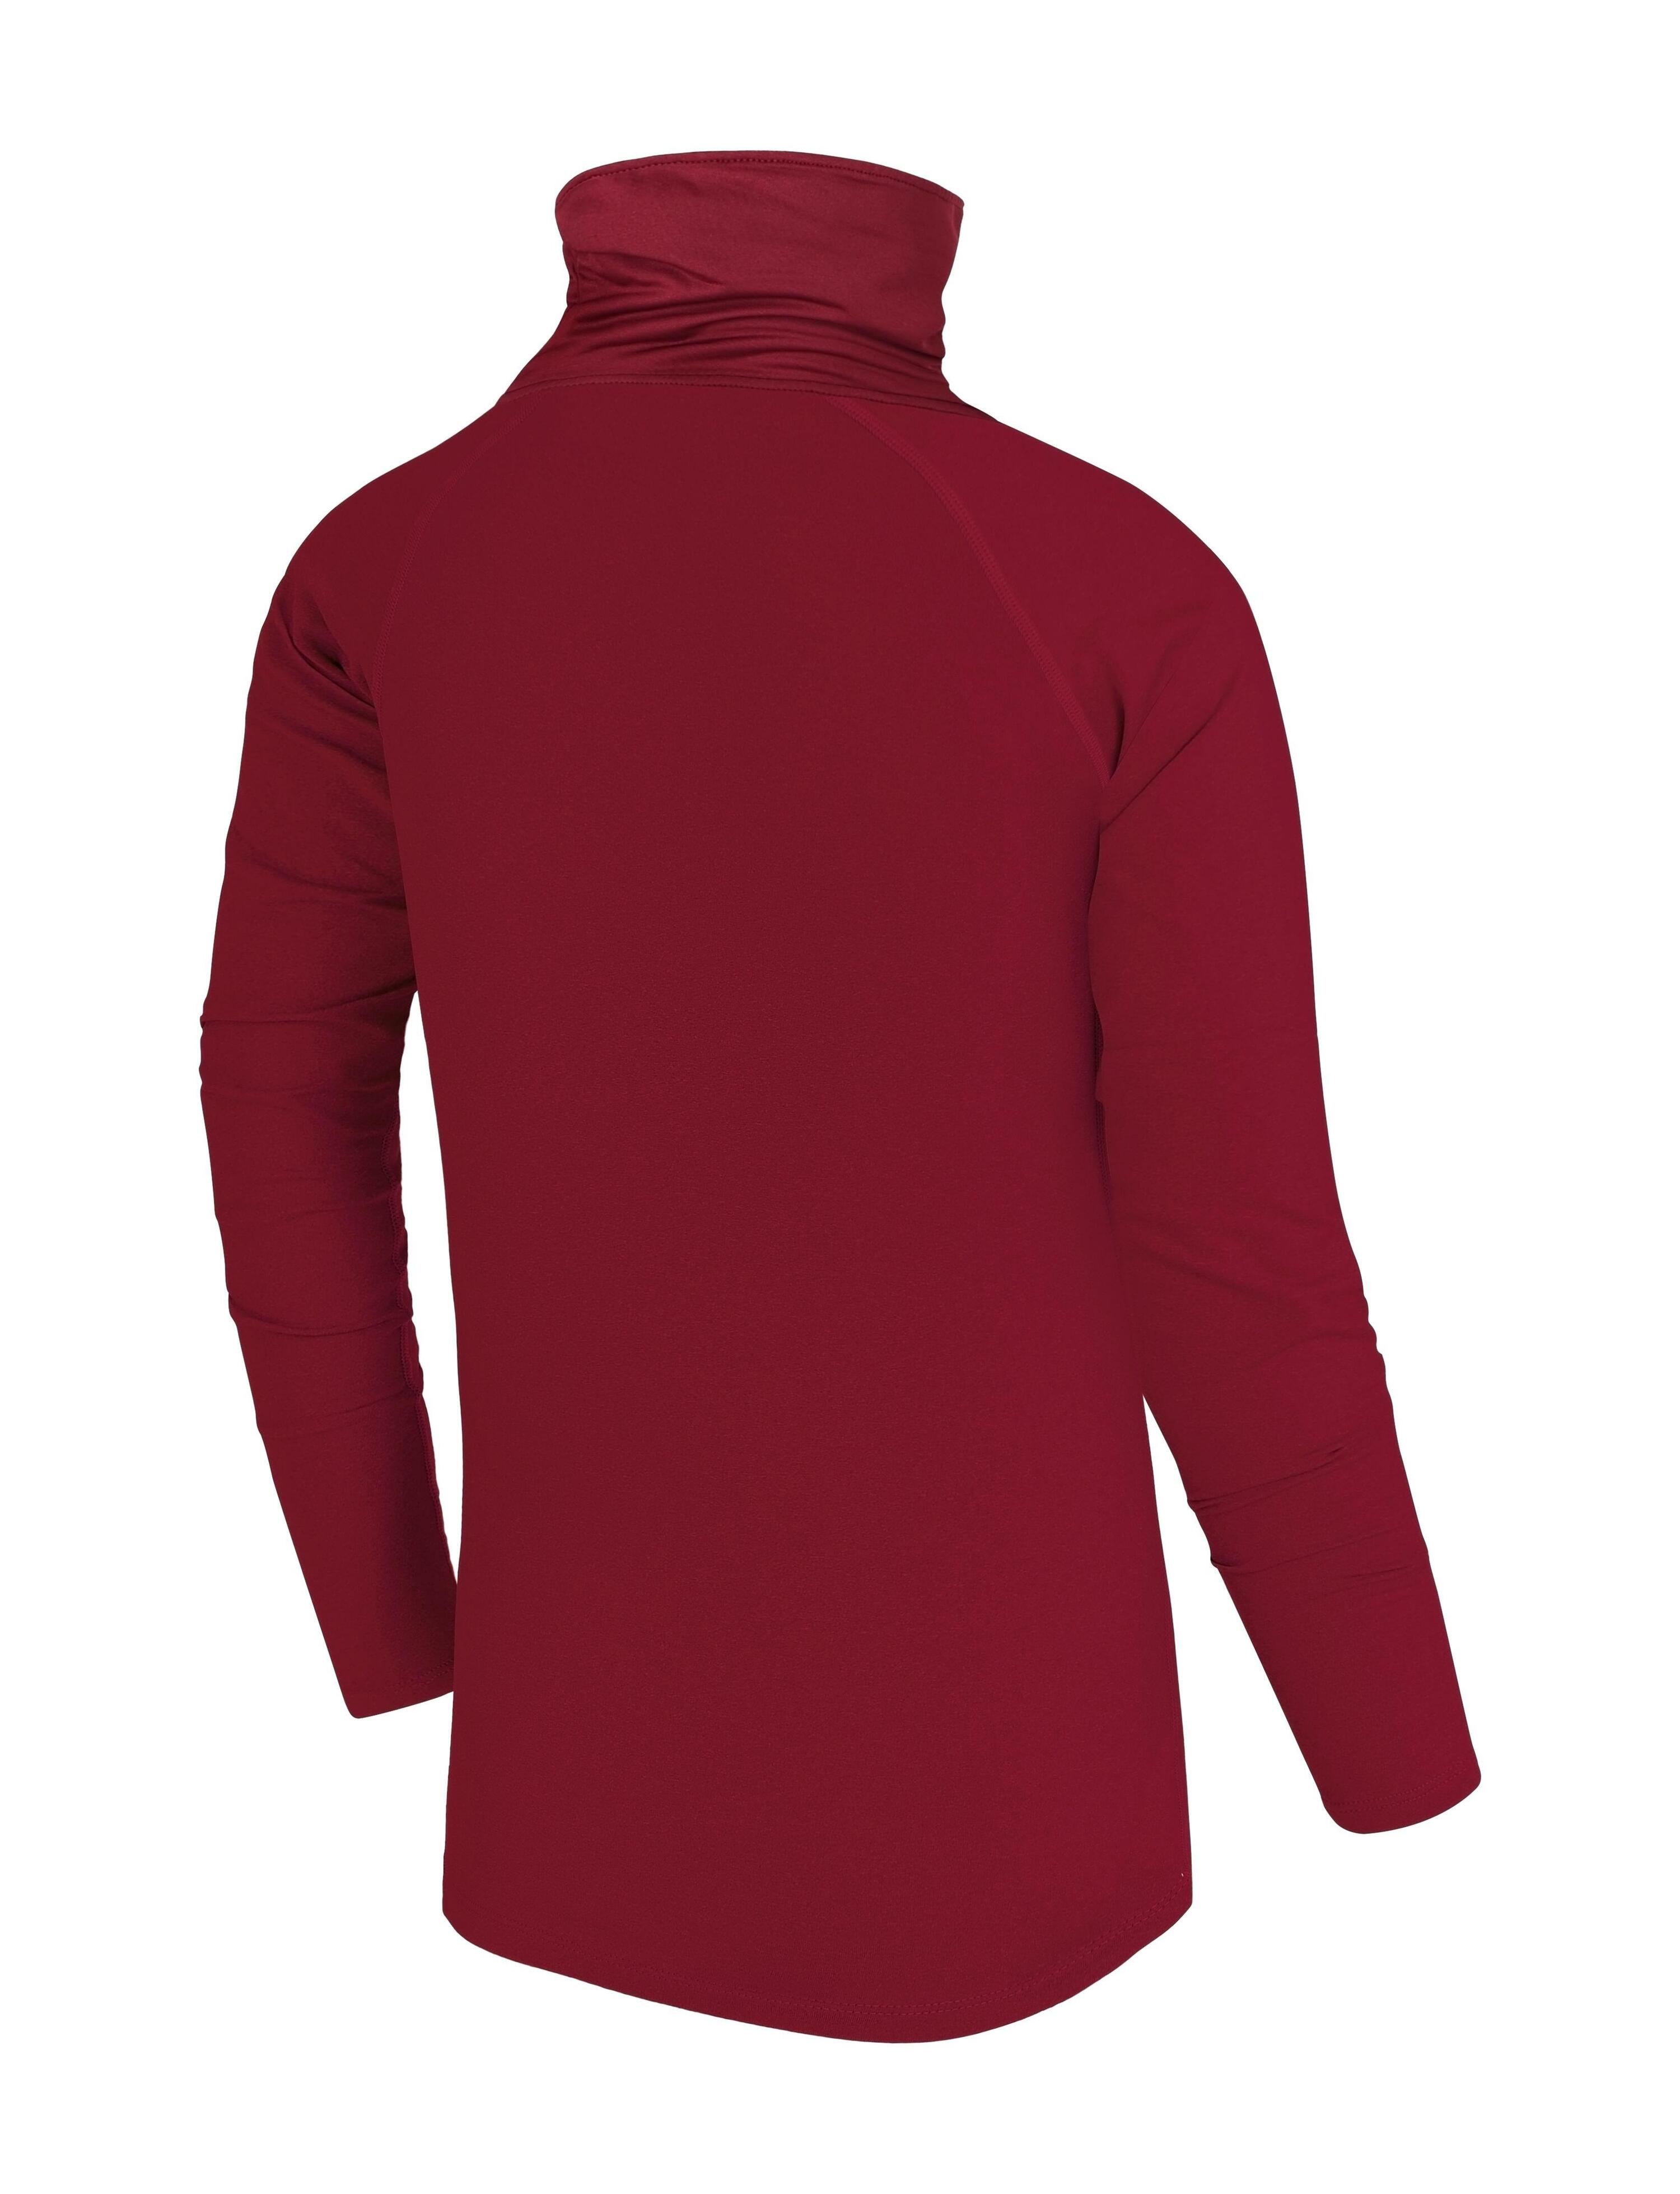 Girls' Thermal Funnel Neck Top - Cabernet 3/5